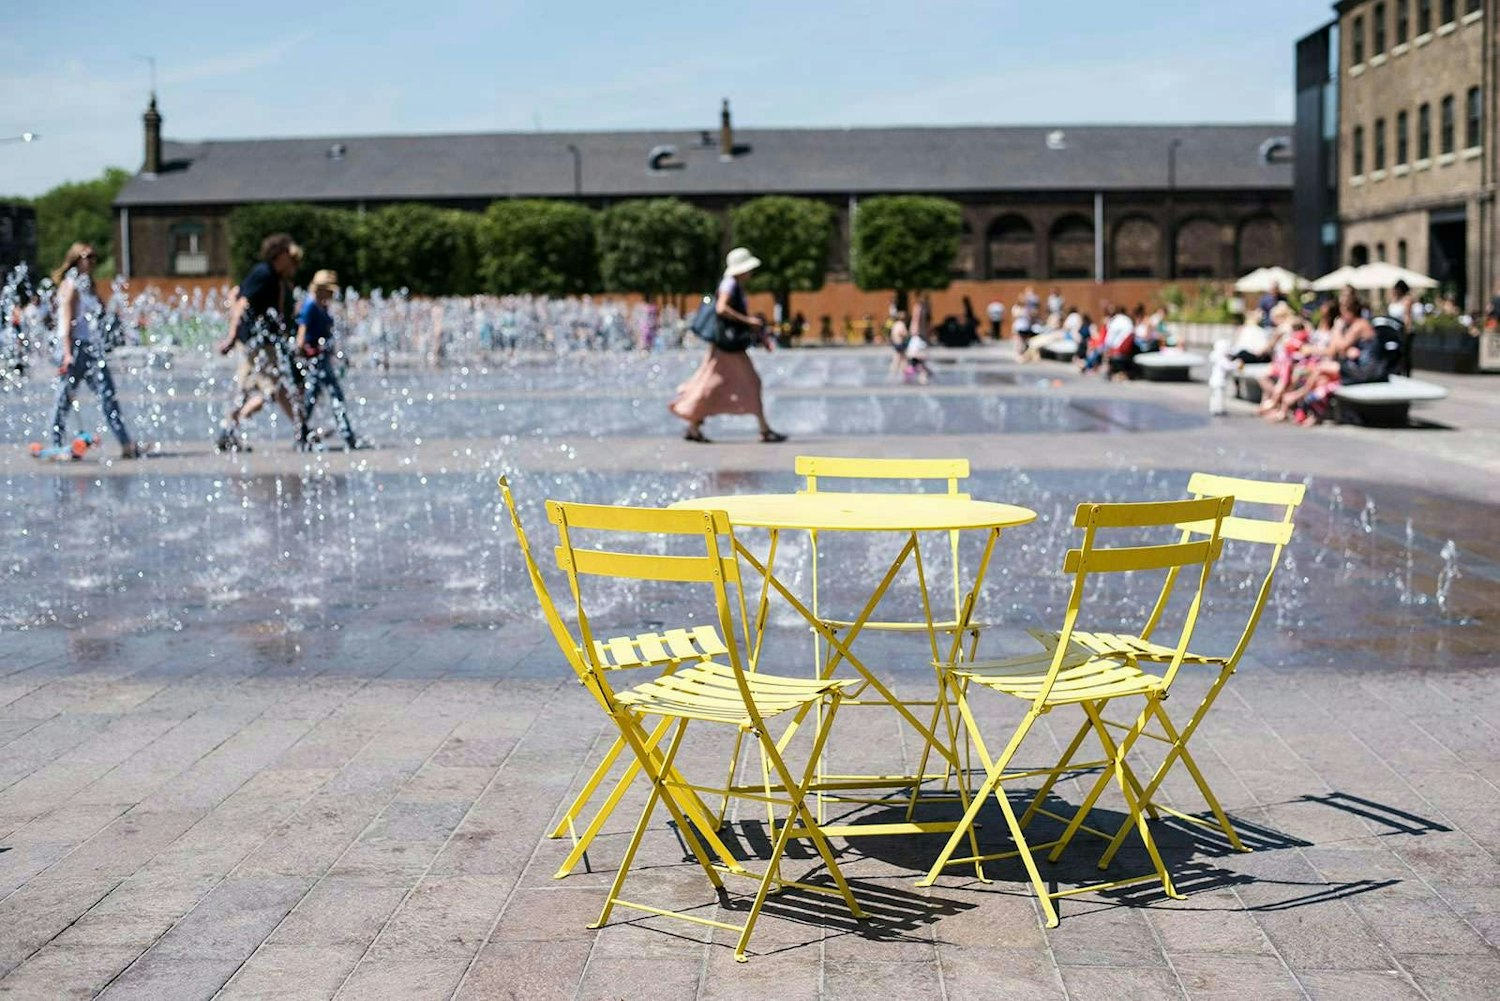 Public space to encourage play such as fountains and seating (example image provided)